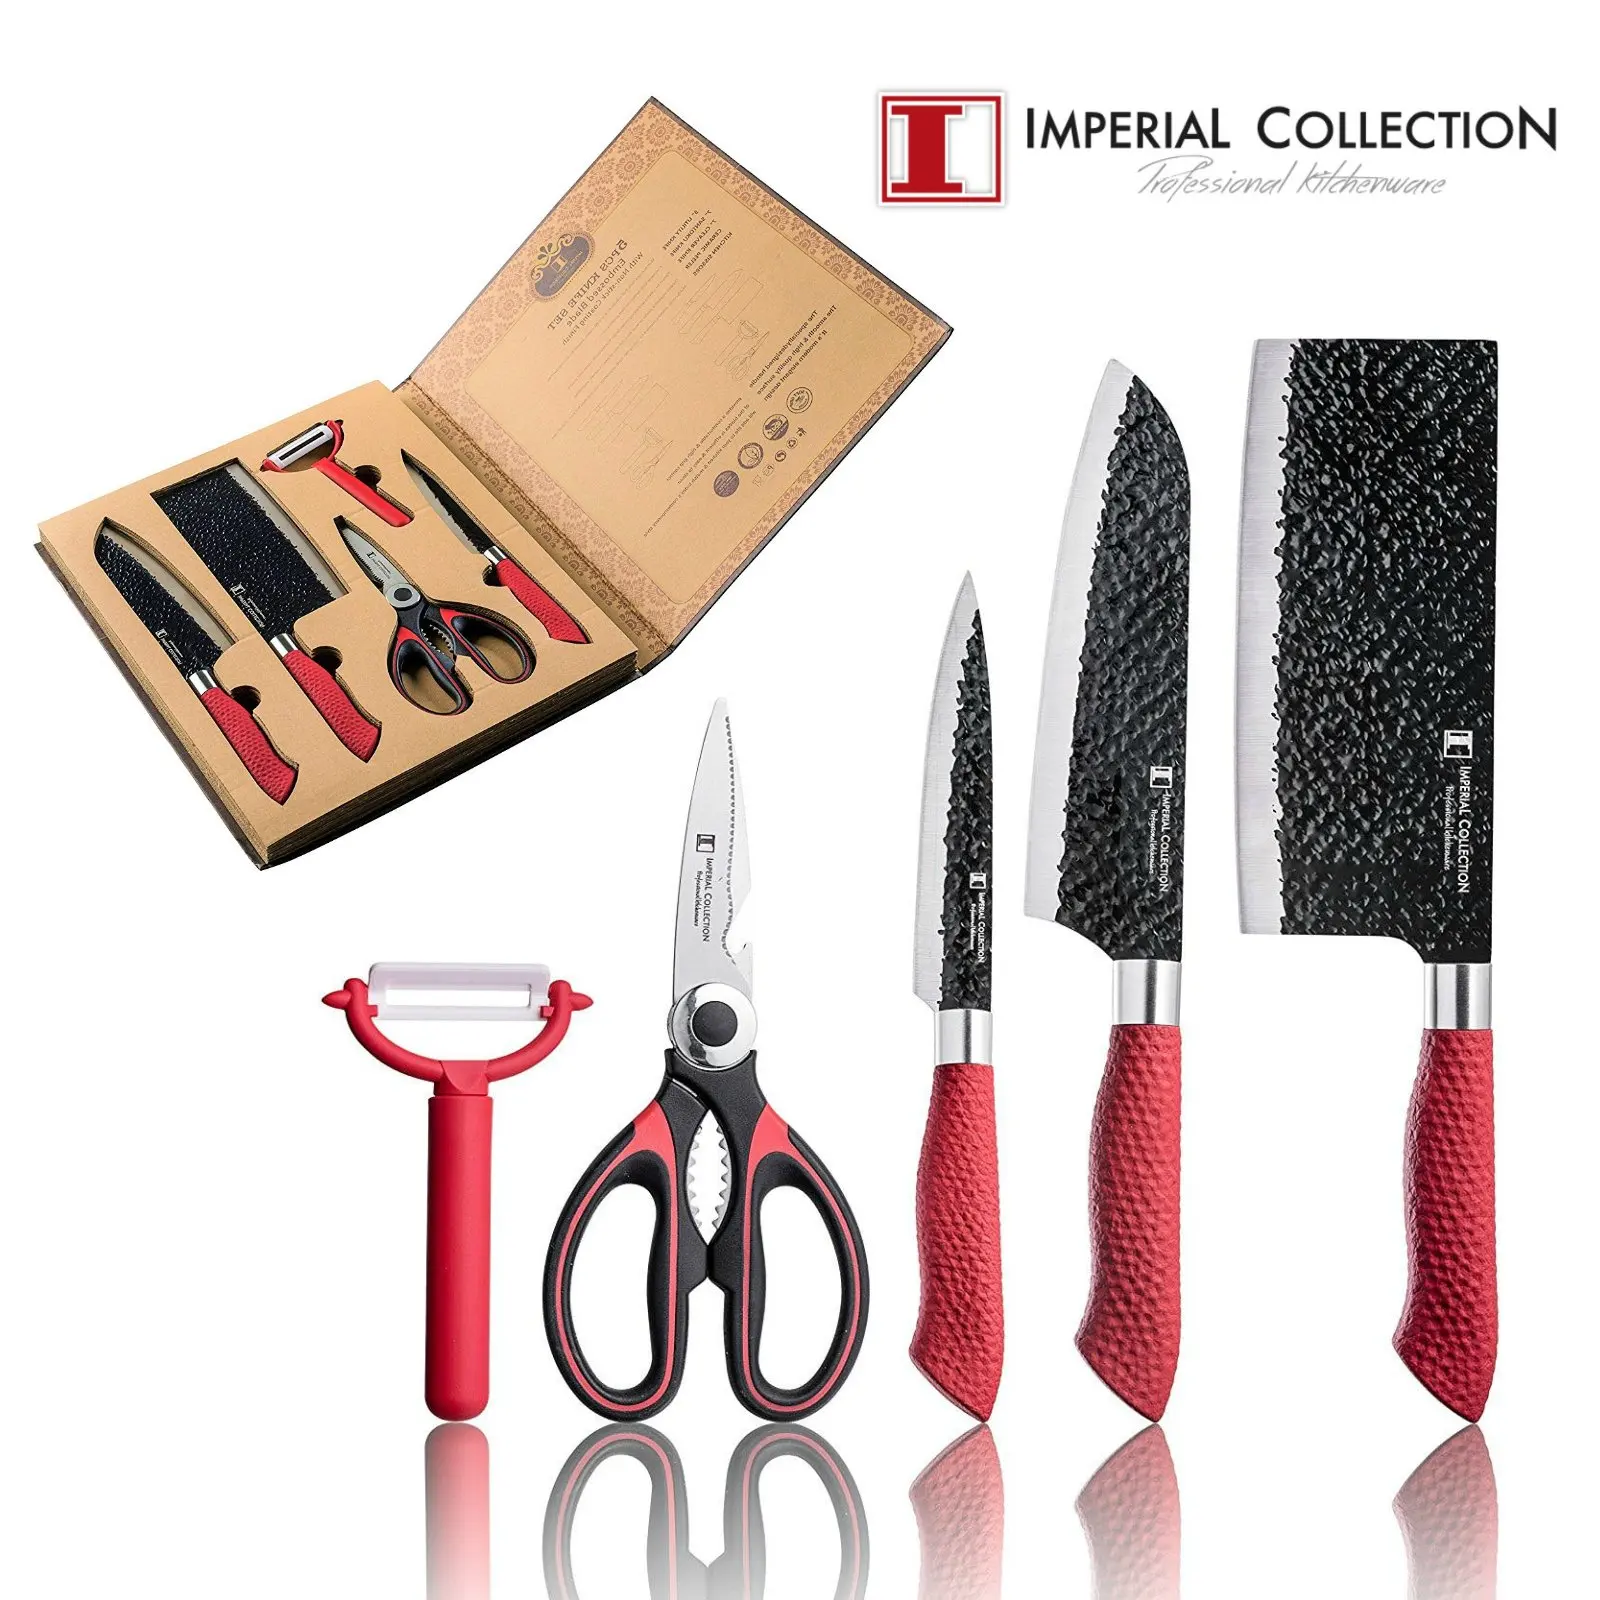 Buy Imperial Collection Stainless Steel Kitchen Knife 9 ...